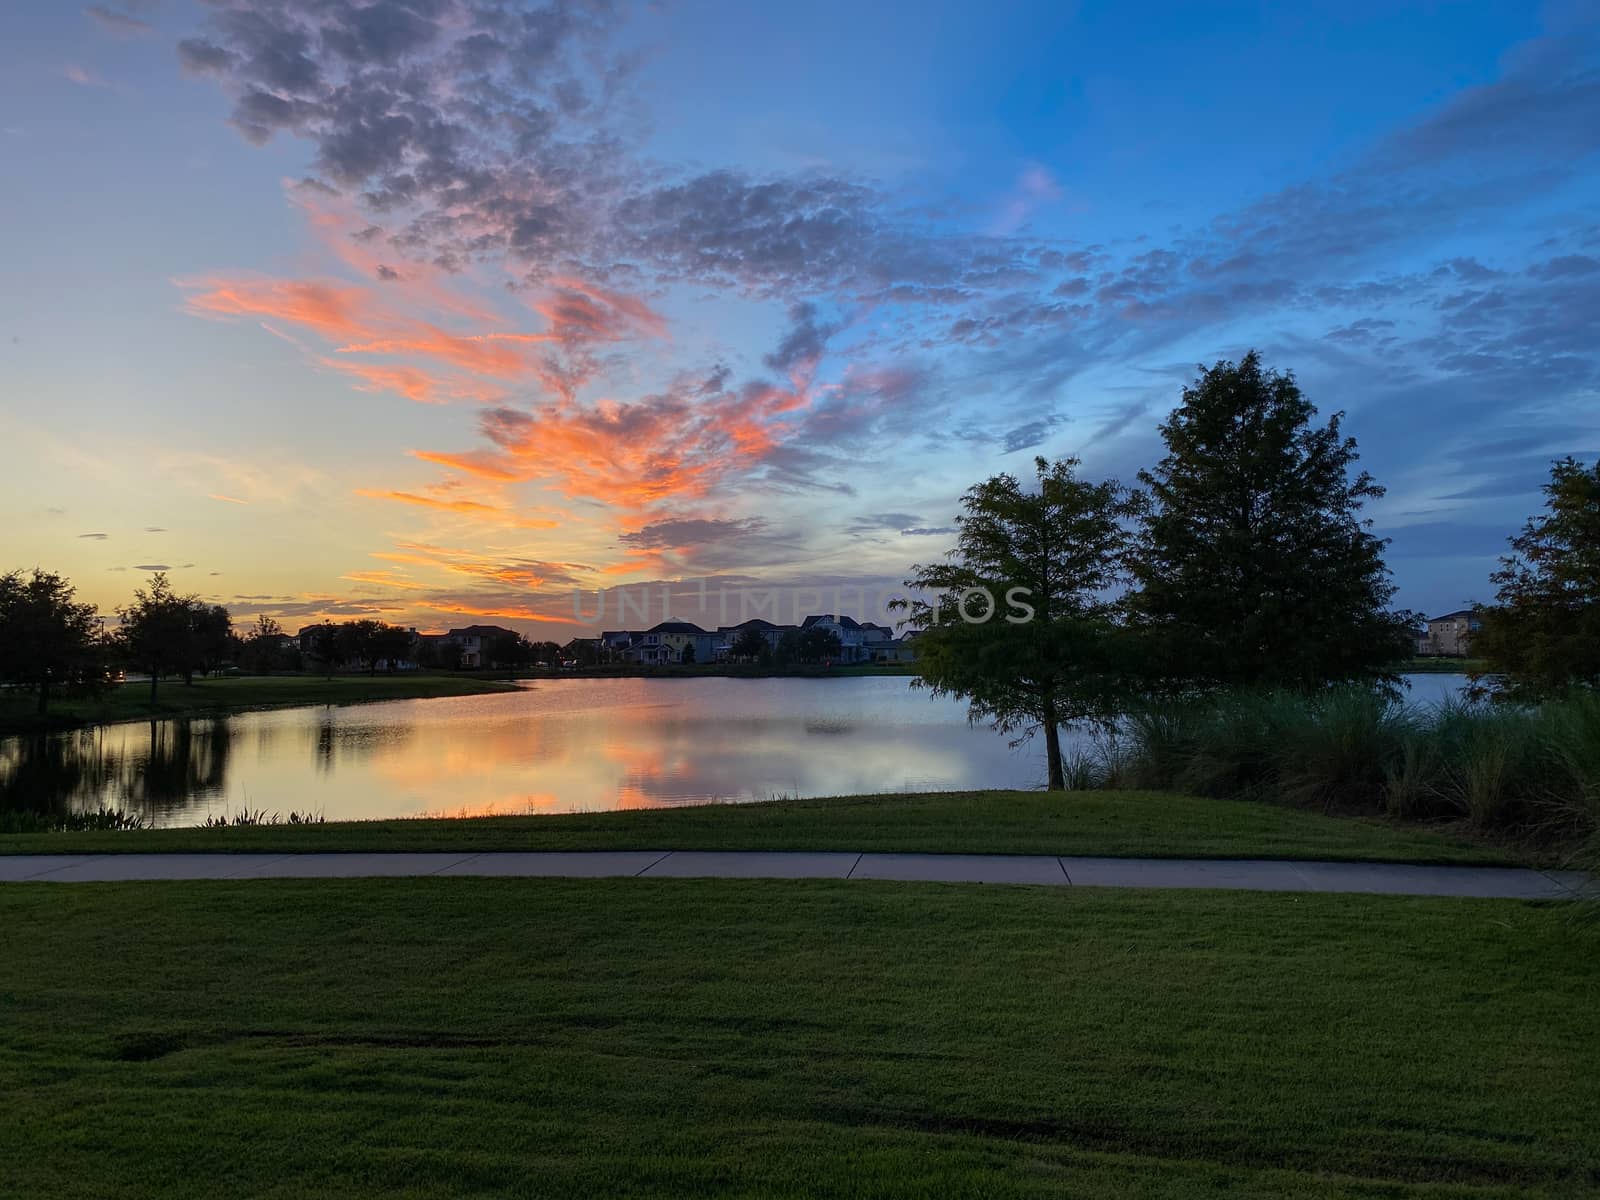 A colorful sunset over a lake in a neighborhood by Jshanebutt